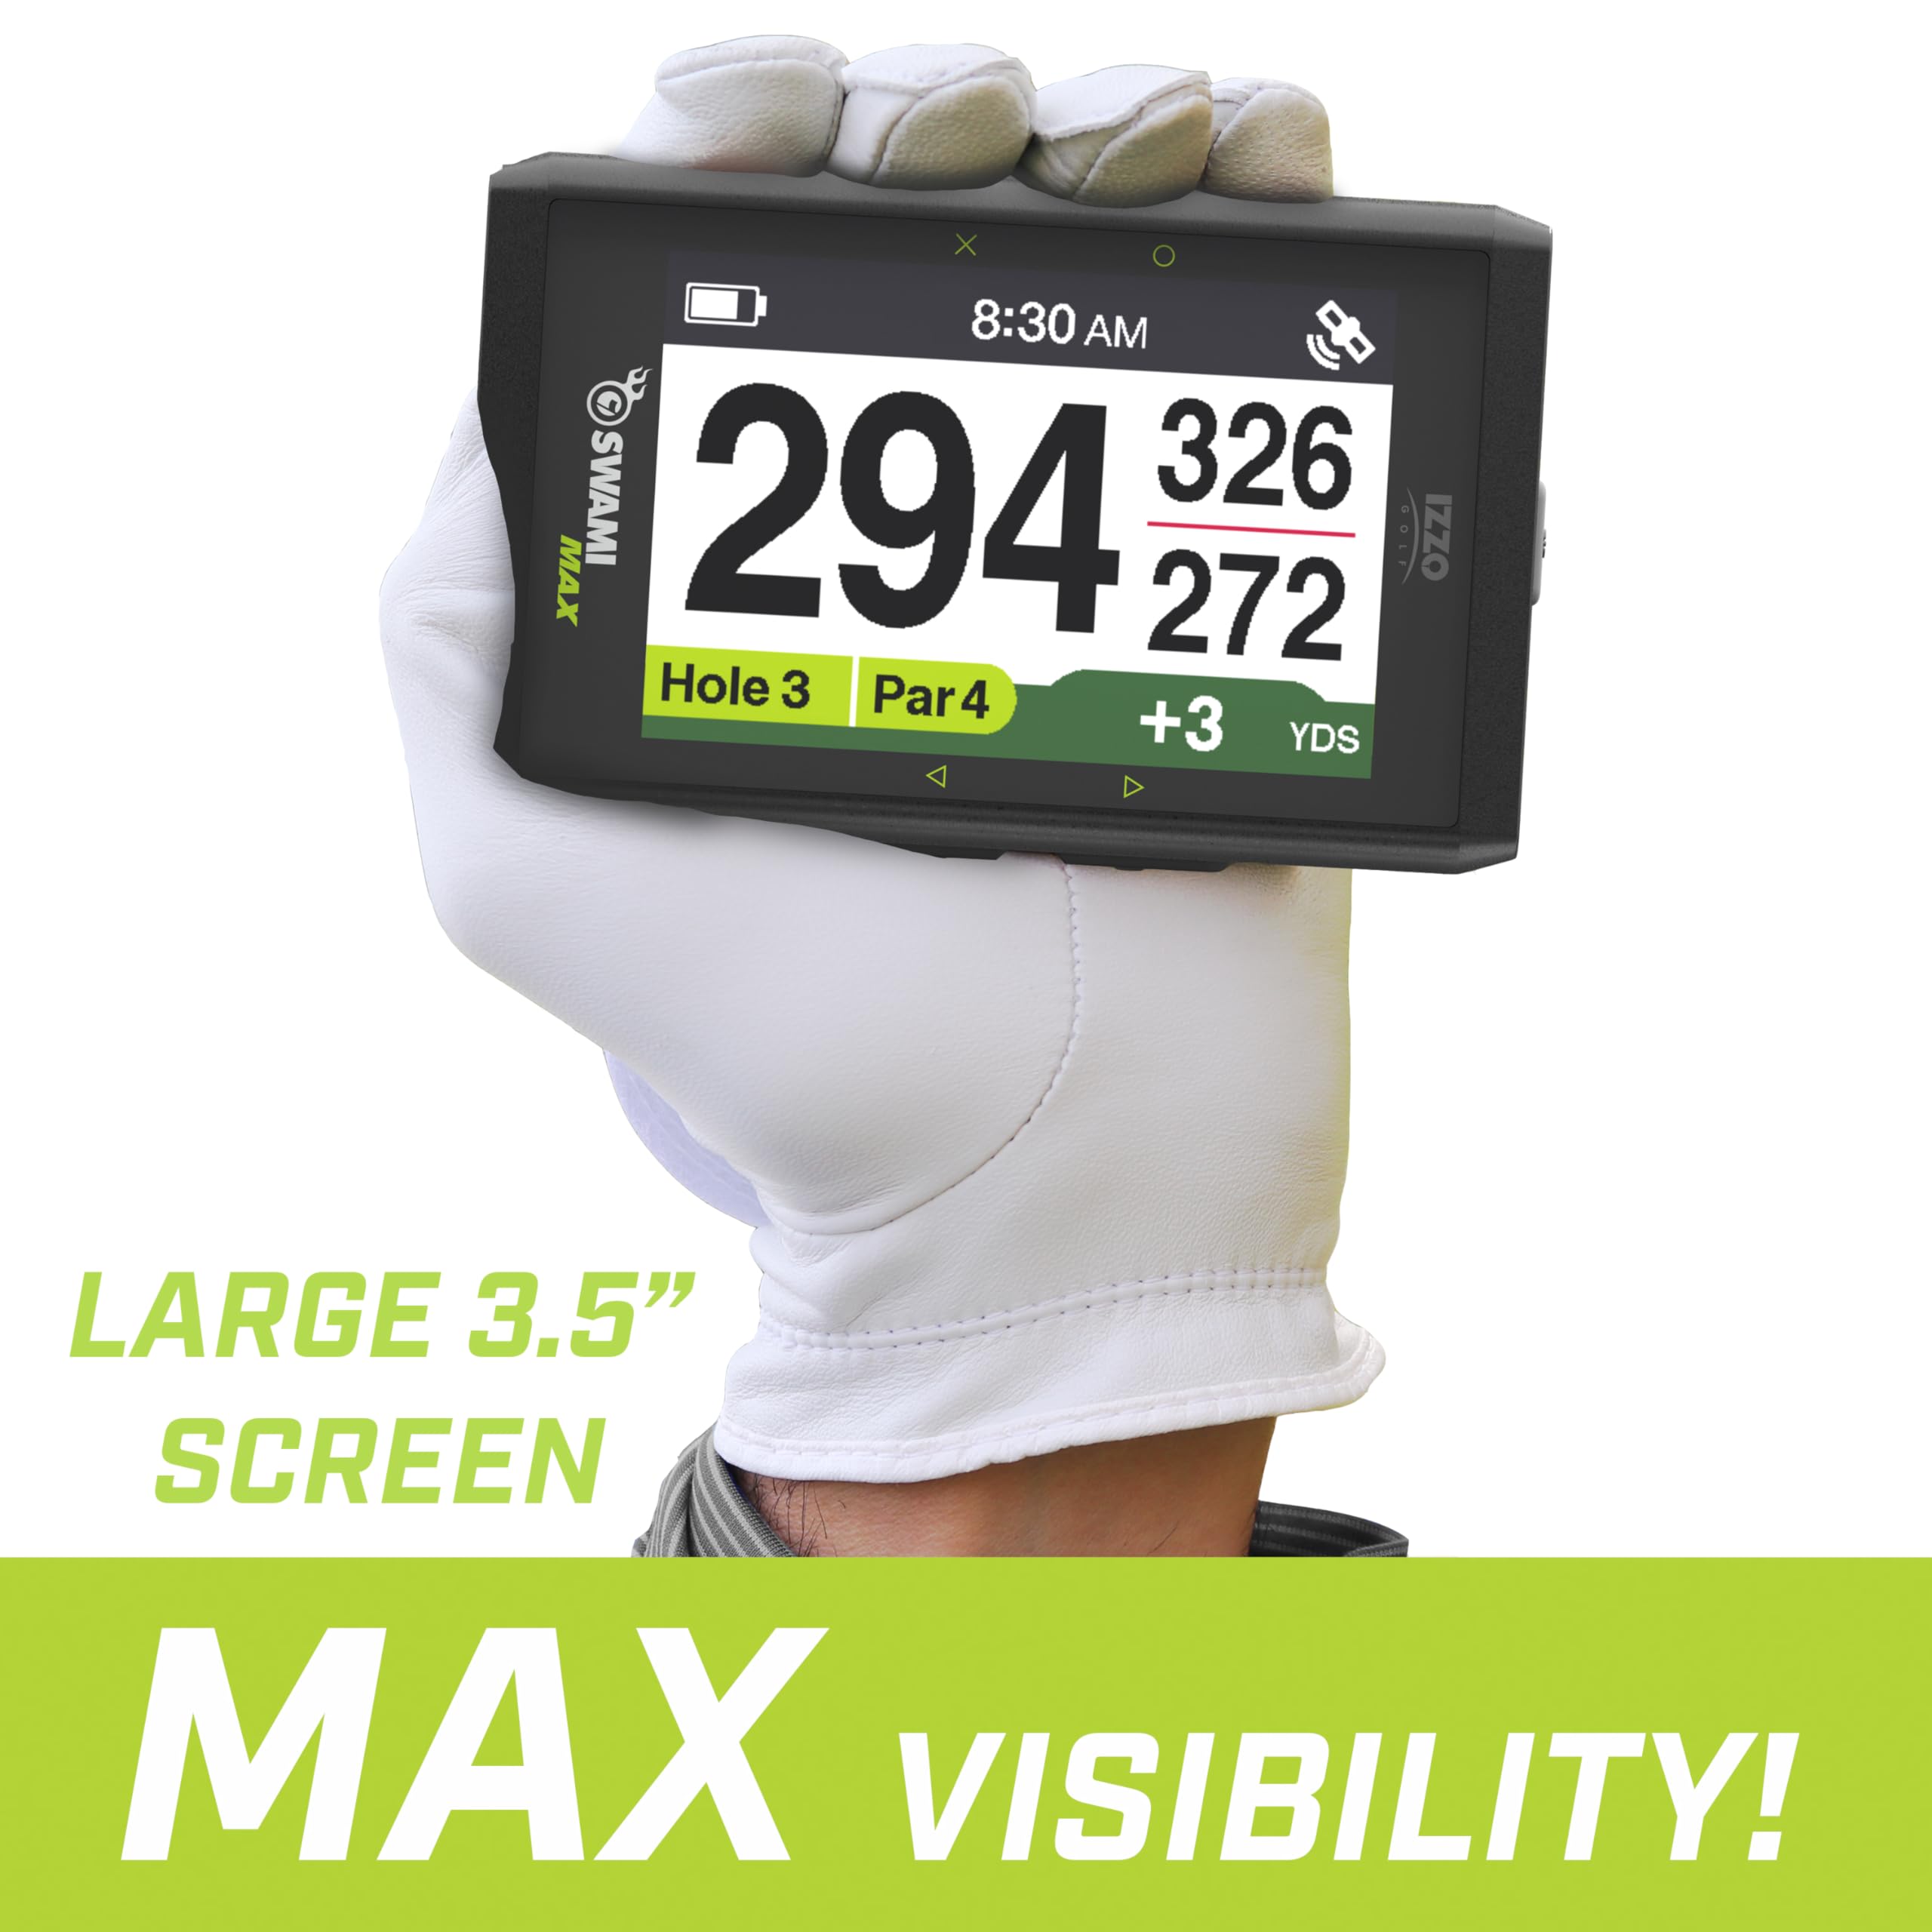 IZZO Golf Swami Max Handheld GPS Unit - Rangefinder Golf GPS with Oversized Large Color Screen for Measuring Golf Distances